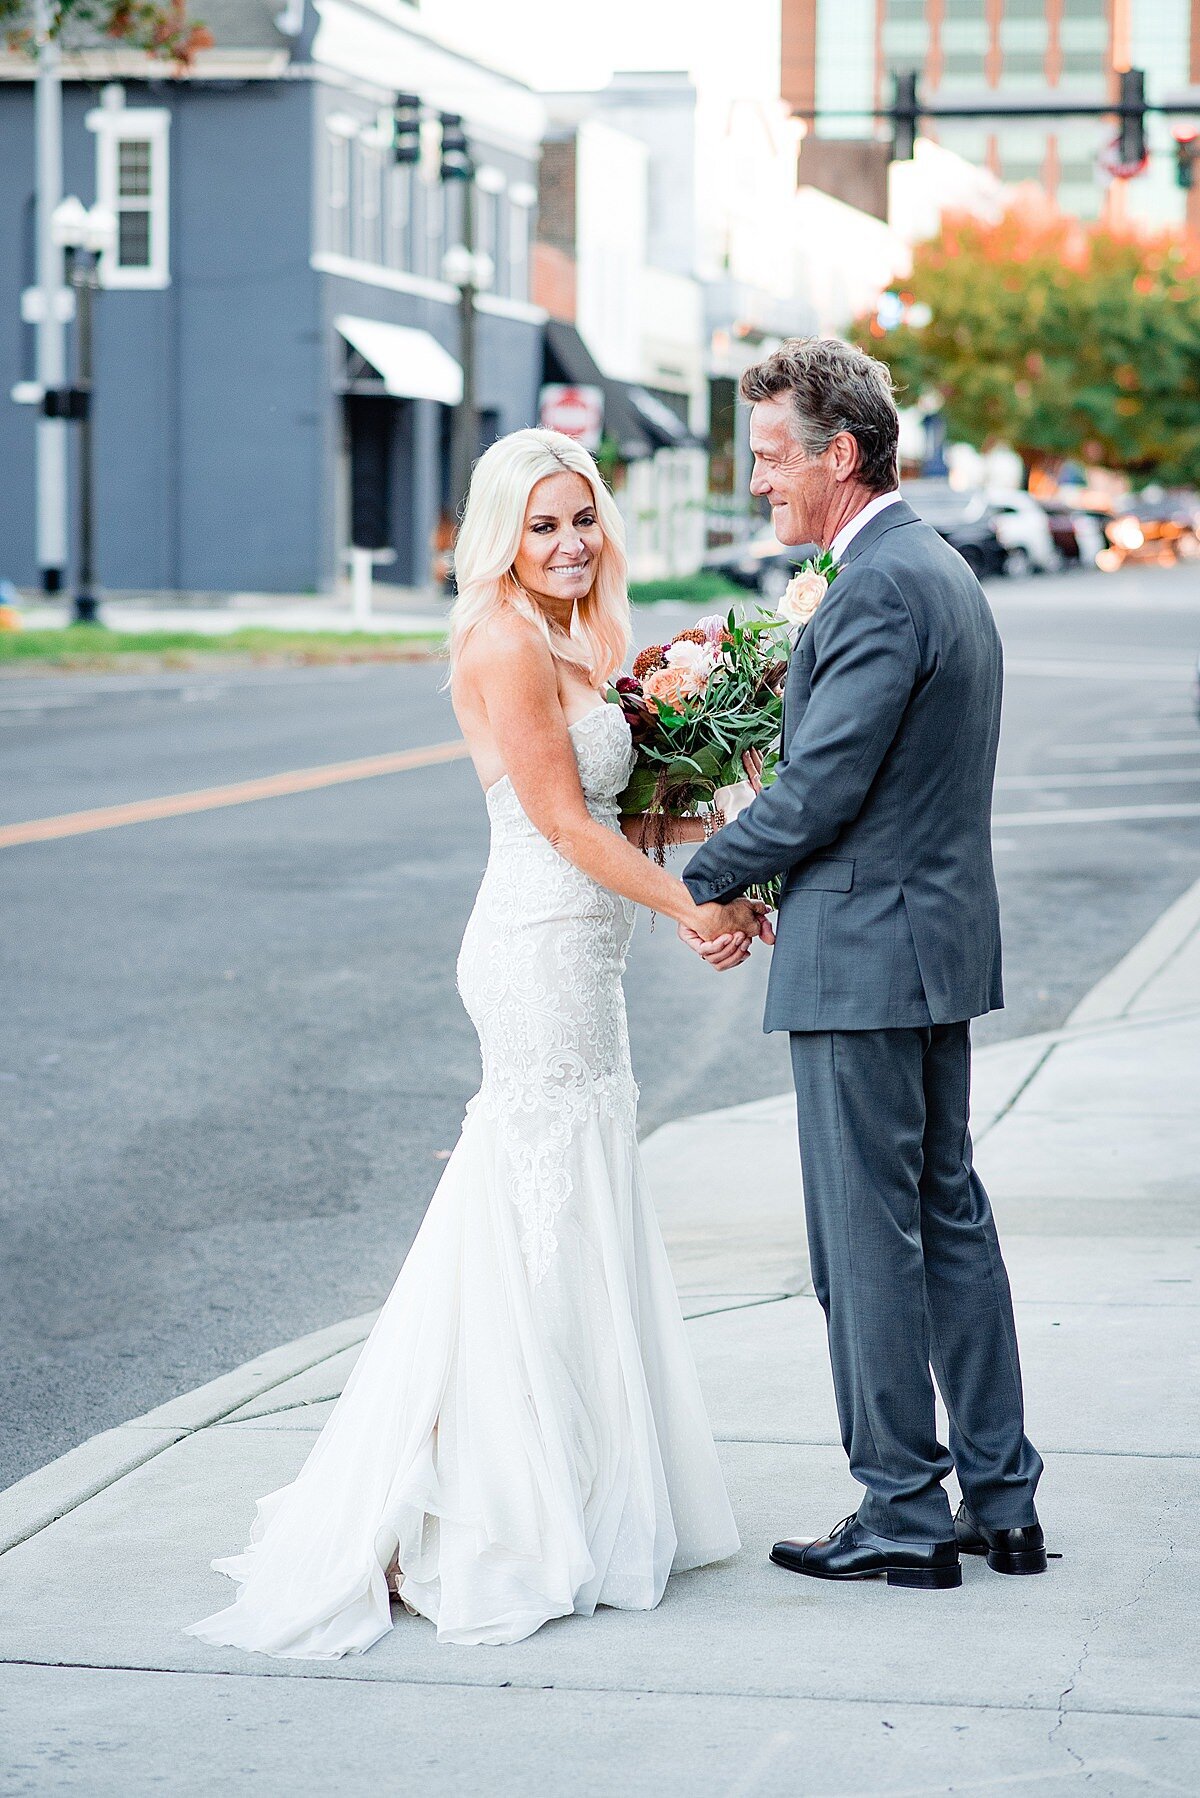 The bride and groom walk down the streets of Murfreesboro. A dark gray building an d office tower are in the background. The bride is wearing a mermaid style dress with a flowing skirt and sweep train. She is smiling at the camera. The groom holds the bride's hand and looks over at her. He is wearing a charcoal gray suit with a blush boutonniere. The bride is carrying a large bouquet of peach, burgundy, blush and ivory flowers with greenery.